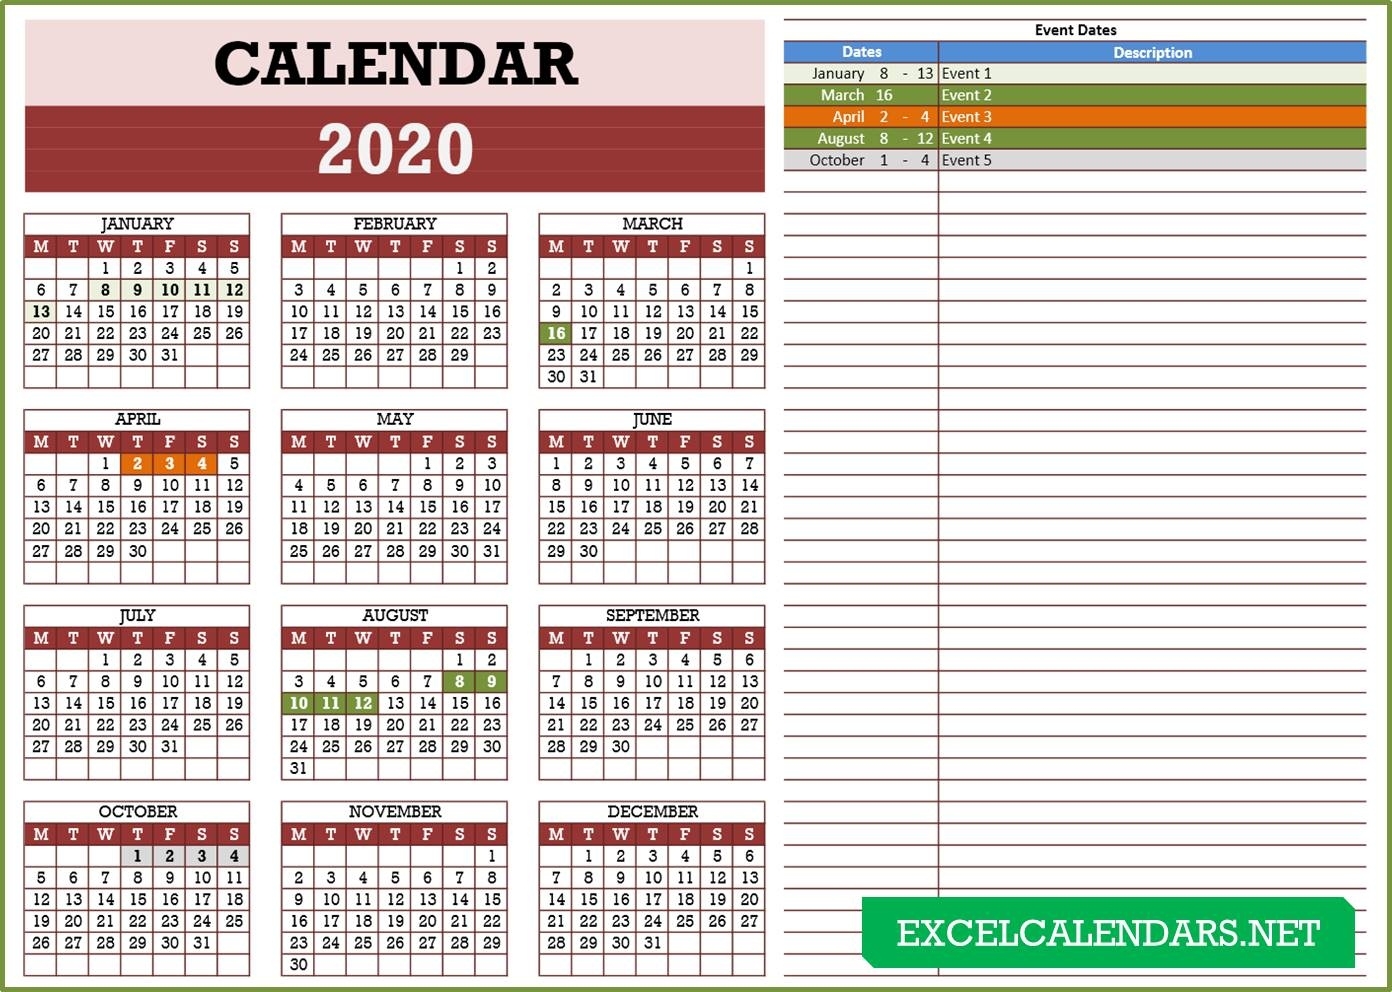 Yearly Calendar Templates For Year 2019 | 2020 | 2021 | 2022 Year Calendar Of Events Template